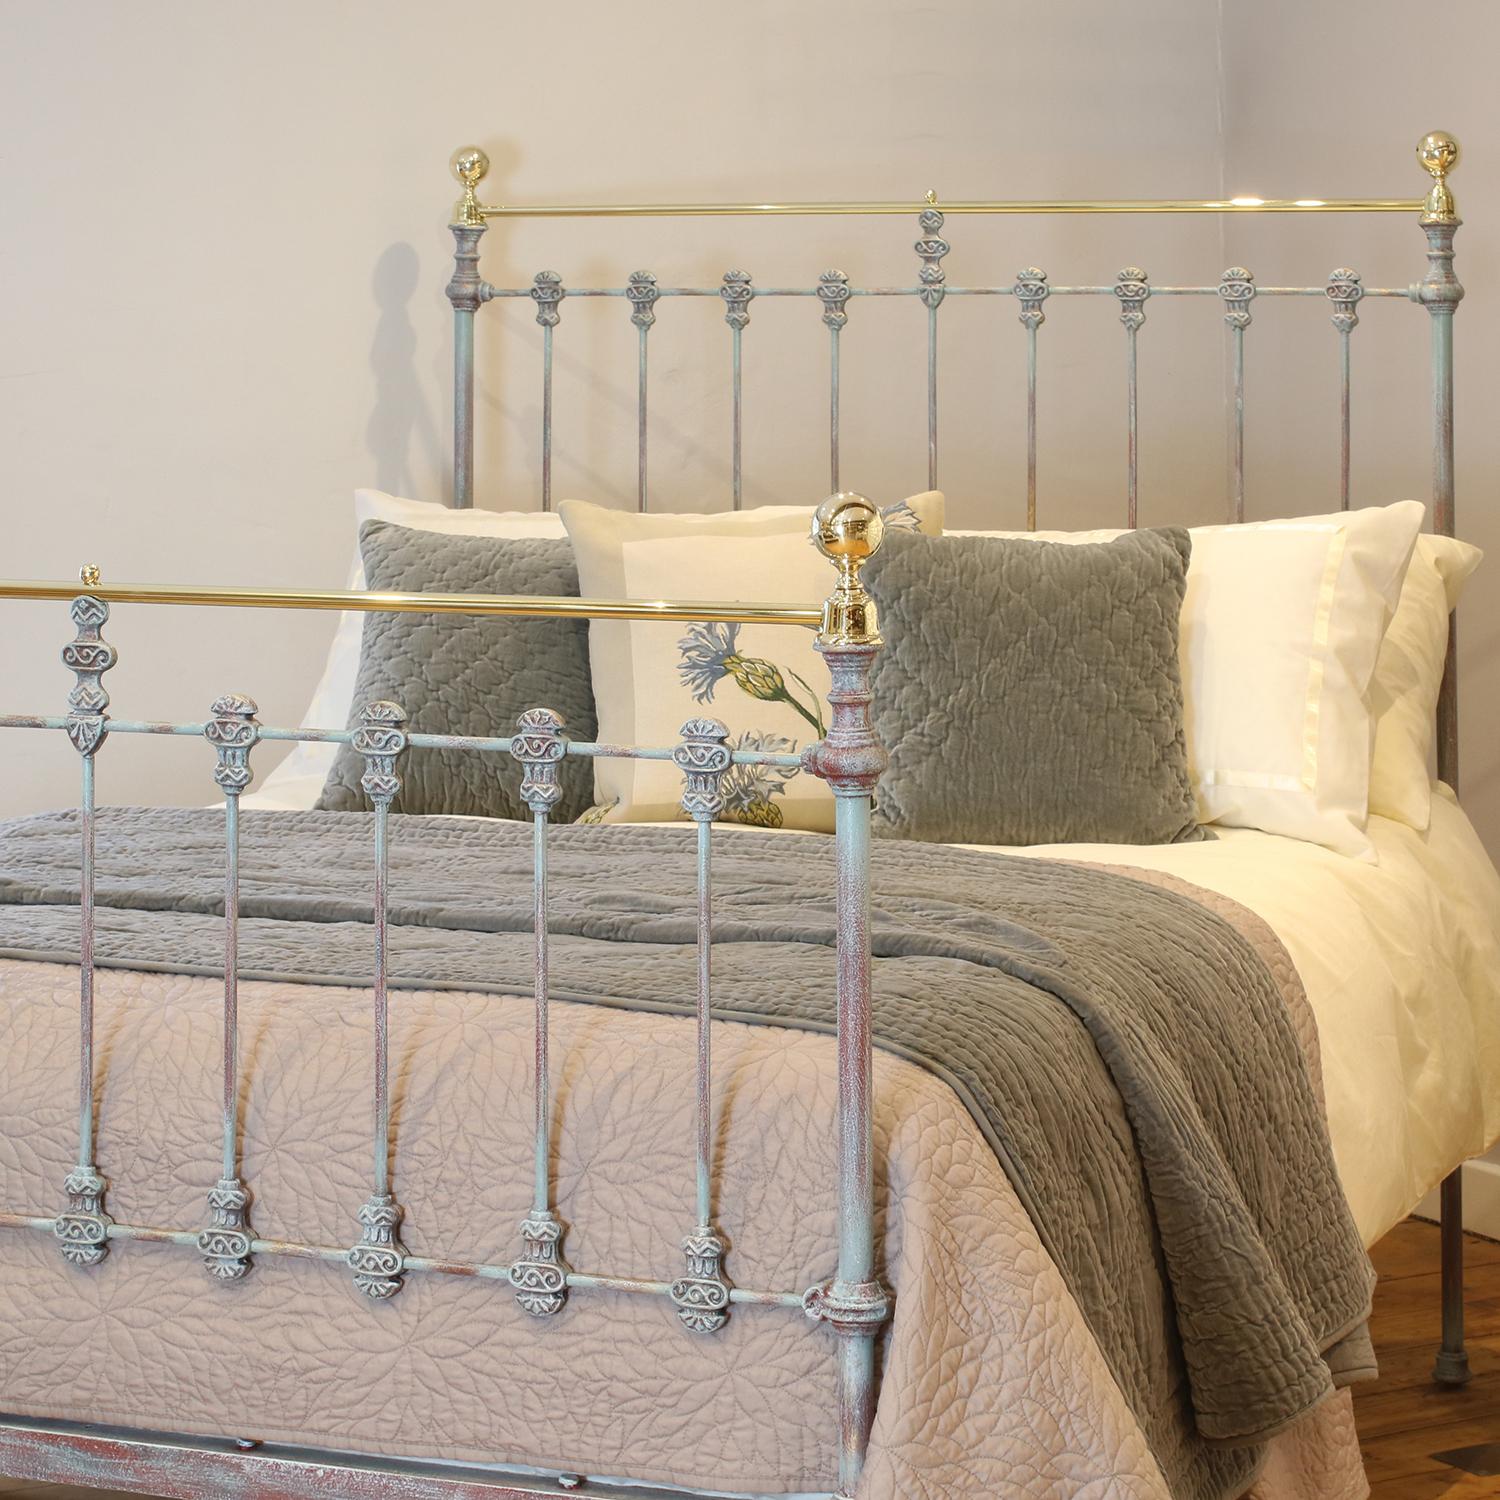 Late Victorian antique brass and iron bed with decorative cast iron mouldings, finished in blue verdigris, with straight brass top rail and round knobs. 

This bed accepts a double size 4ft 6in wide (54 inch or 135cm) base and mattress.

The